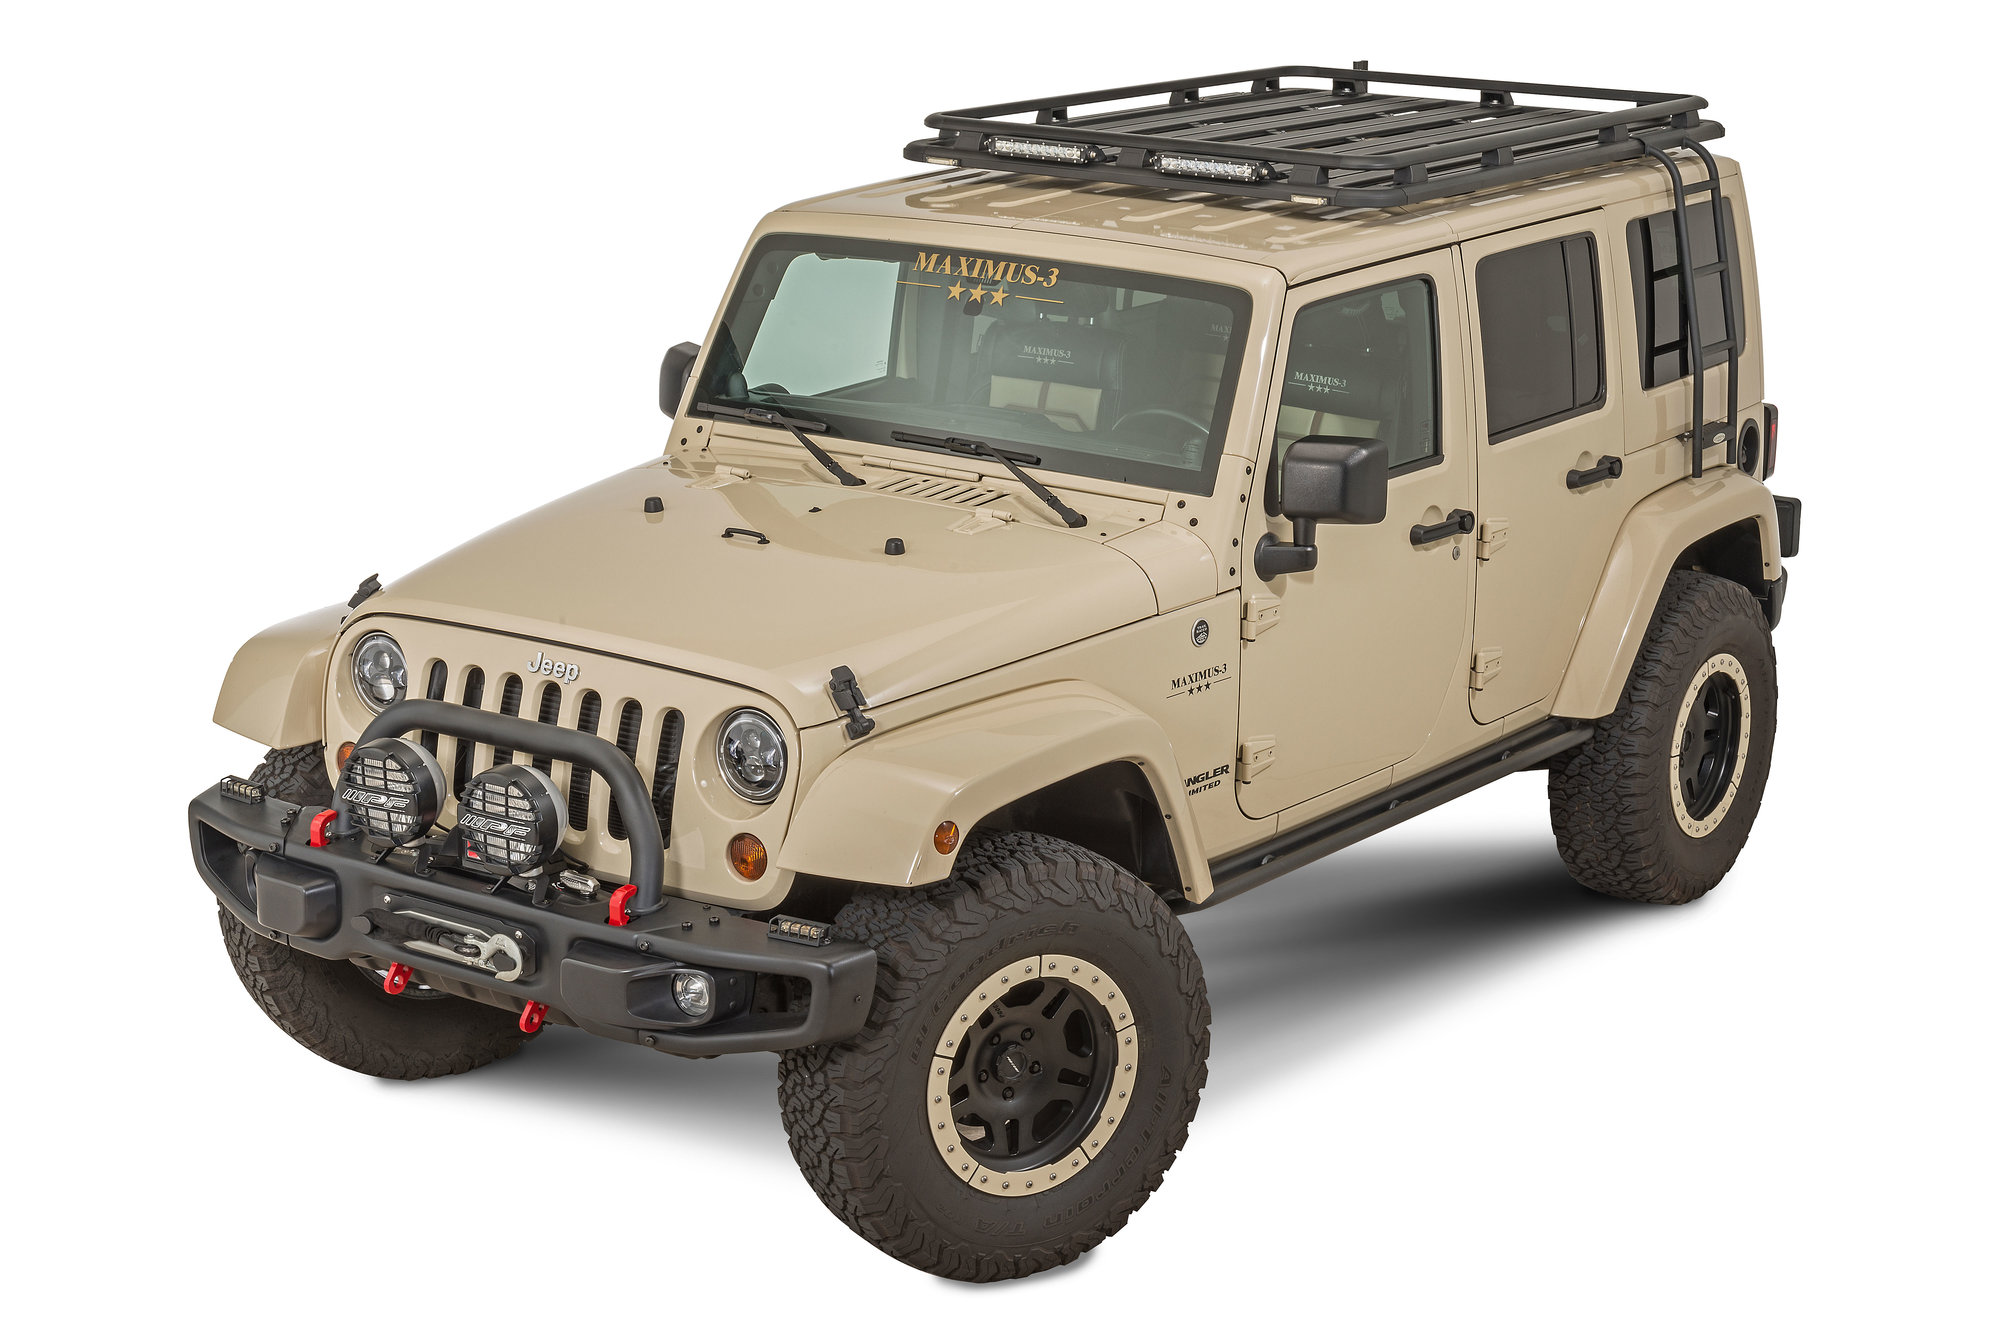 Maximus-3 0300-004RSL-OO Side Roof Ladder for 07-18 Jeep Wrangler JK with  Maximus-3 Pioneer Roof Rack | Quadratec